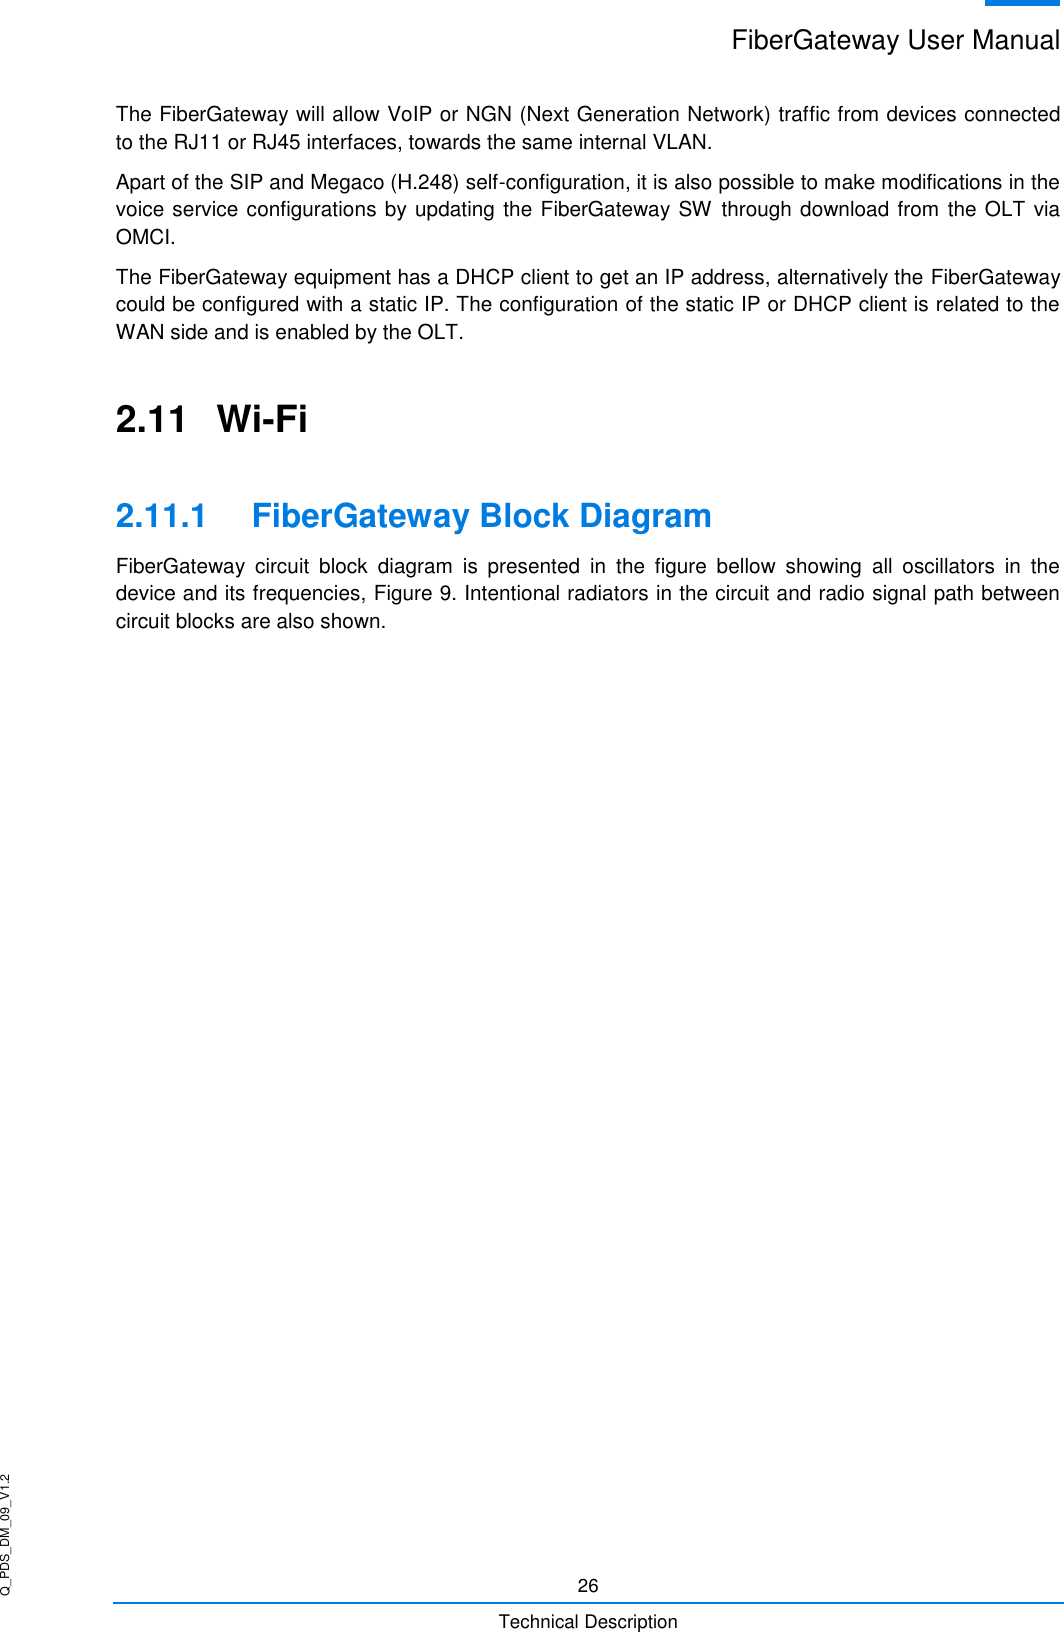 Q_PDS_DM_09_V1.2 FiberGateway User Manual  26 Technical Description The FiberGateway will allow VoIP or NGN (Next Generation Network) traffic from devices connected to the RJ11 or RJ45 interfaces, towards the same internal VLAN. Apart of the SIP and Megaco (H.248) self-configuration, it is also possible to make modifications in the voice service configurations by updating the FiberGateway SW through download from the OLT via OMCI. The FiberGateway equipment has a DHCP client to get an IP address, alternatively the FiberGateway could be configured with a static IP. The configuration of the static IP or DHCP client is related to the WAN side and is enabled by the OLT. 2.11  Wi-Fi 2.11.1  FiberGateway Block Diagram FiberGateway  circuit  block  diagram  is  presented  in  the  figure  bellow  showing  all  oscillators  in  the device and its frequencies, Figure 9. Intentional radiators in the circuit and radio signal path between circuit blocks are also shown.  